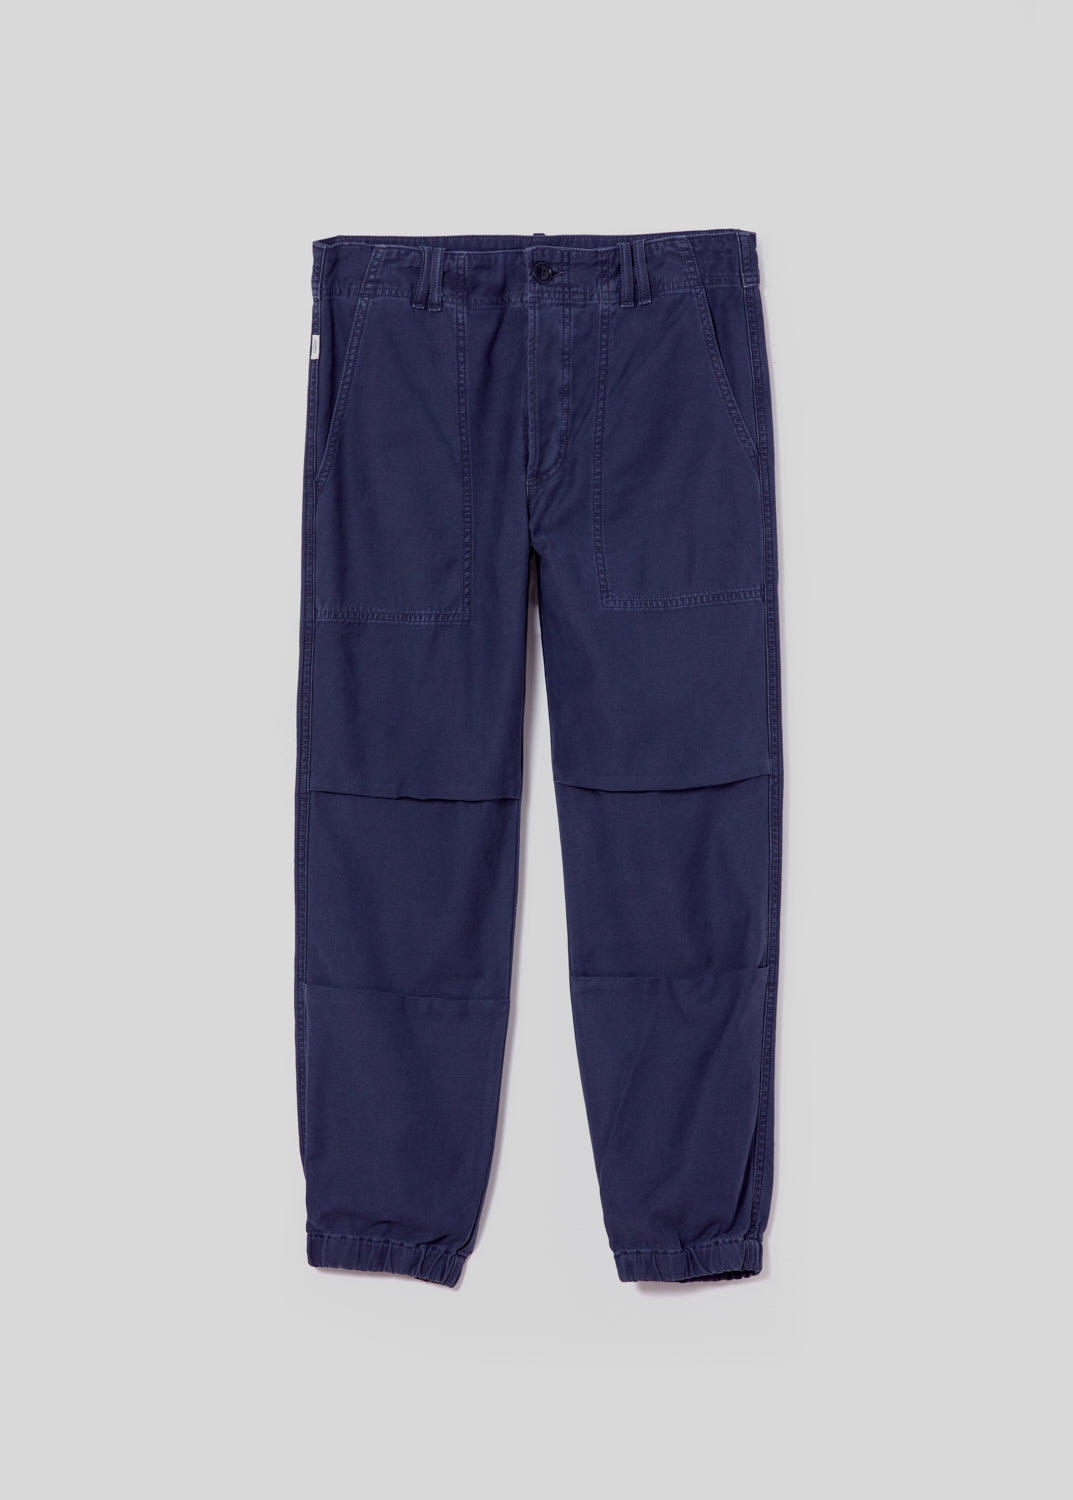 Agni Utility Trouser in Washed Marine